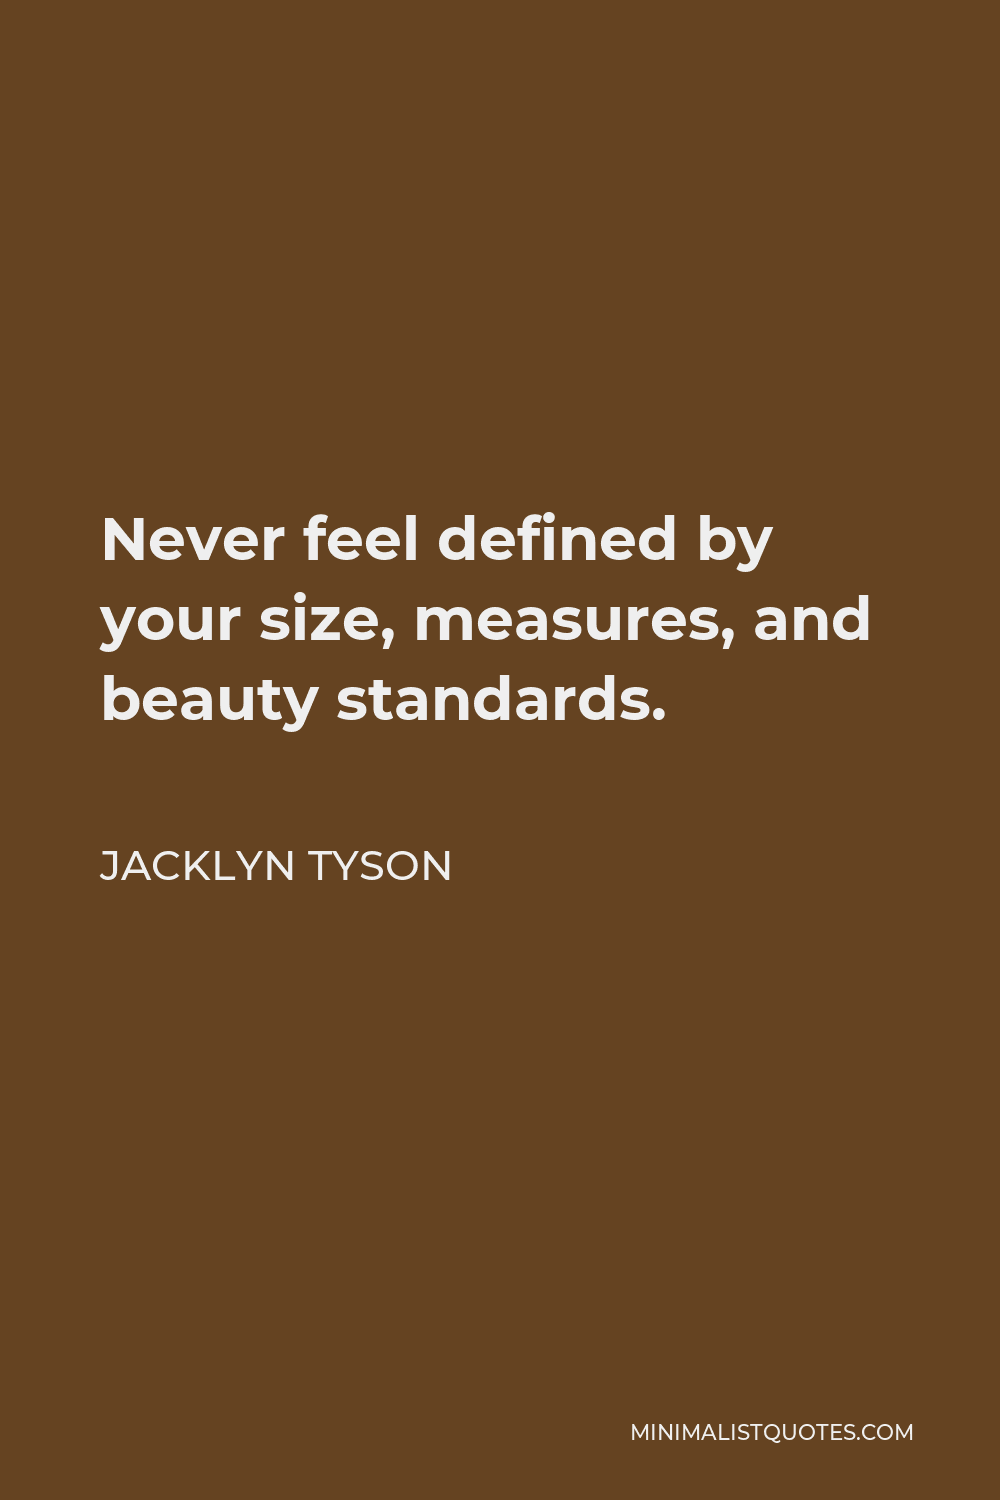 Jacklyn Tyson Quote - Never feel defined by your size, measures, and beauty standards.